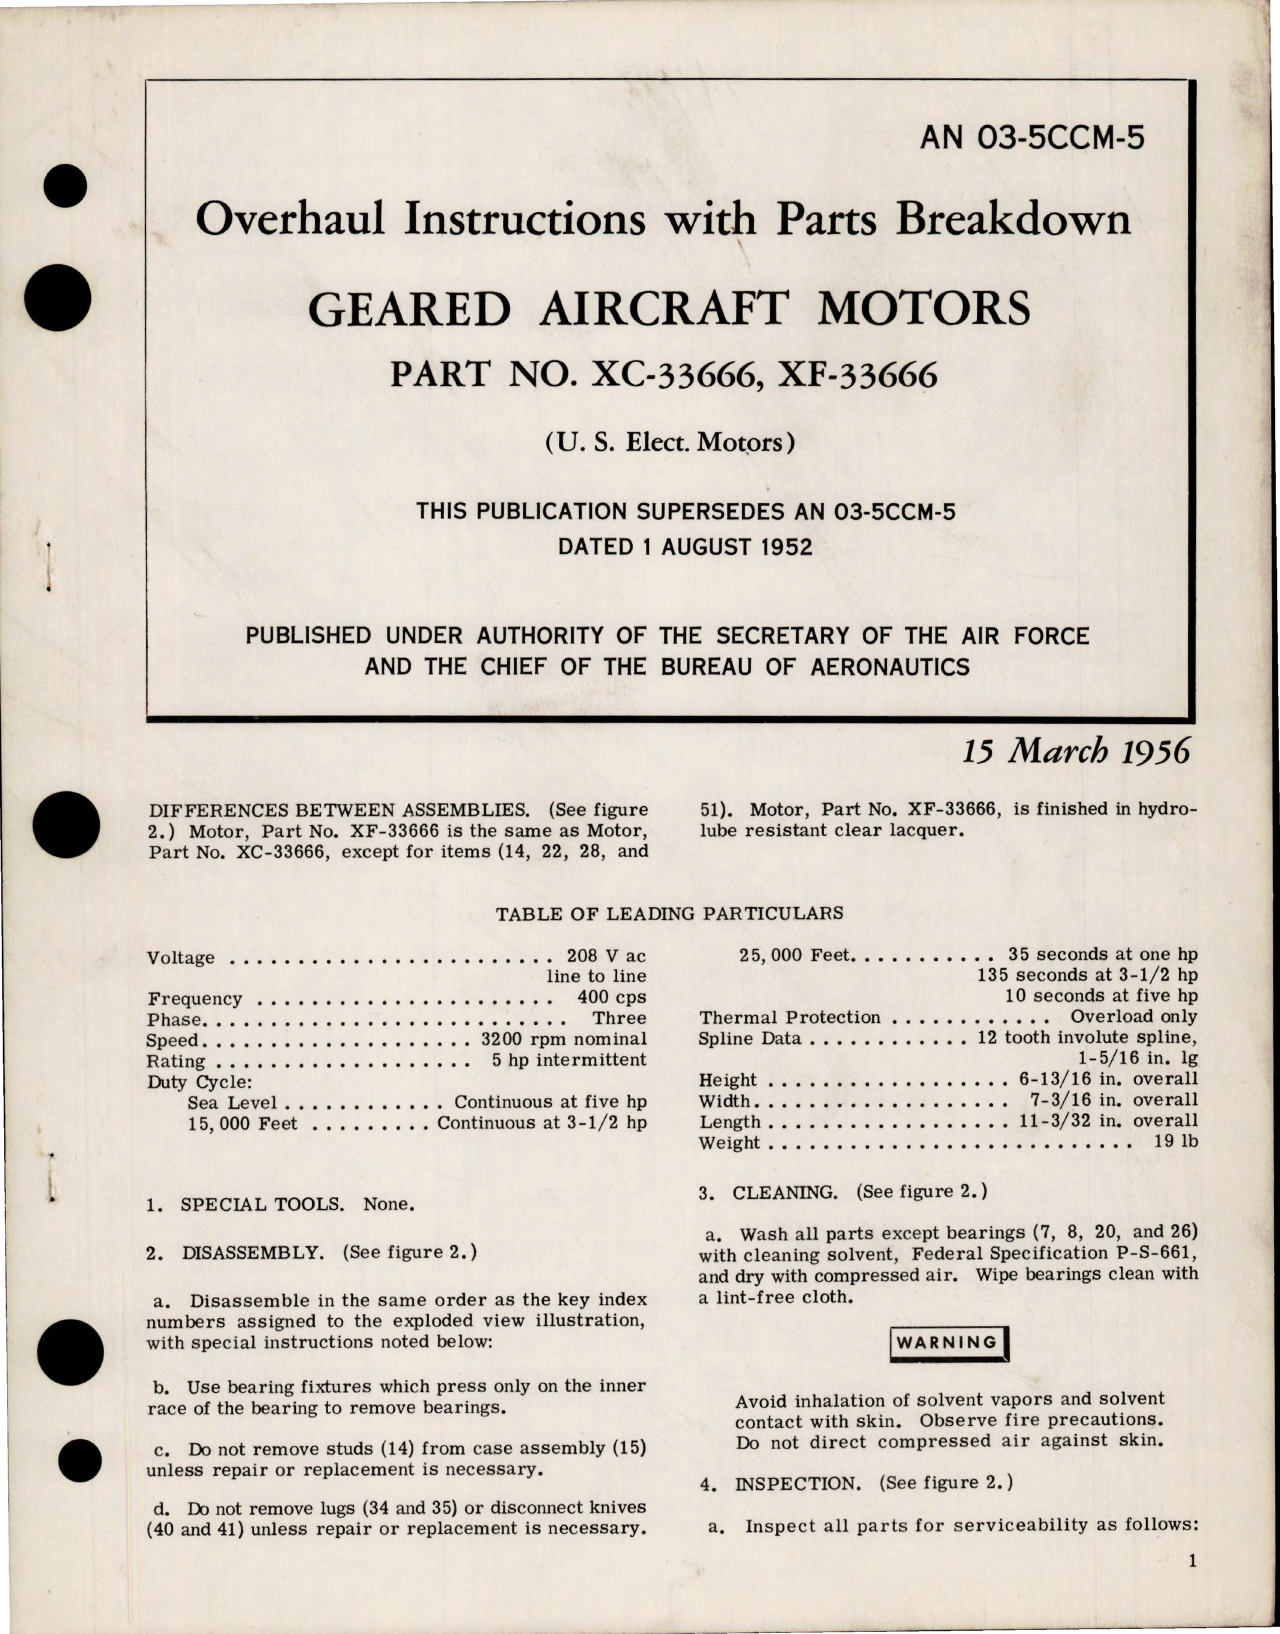 Sample page 1 from AirCorps Library document: Overhaul Instructions with Parts Breakdown for Geared Aircraft Motors - Part XC-33666 and XF-33666